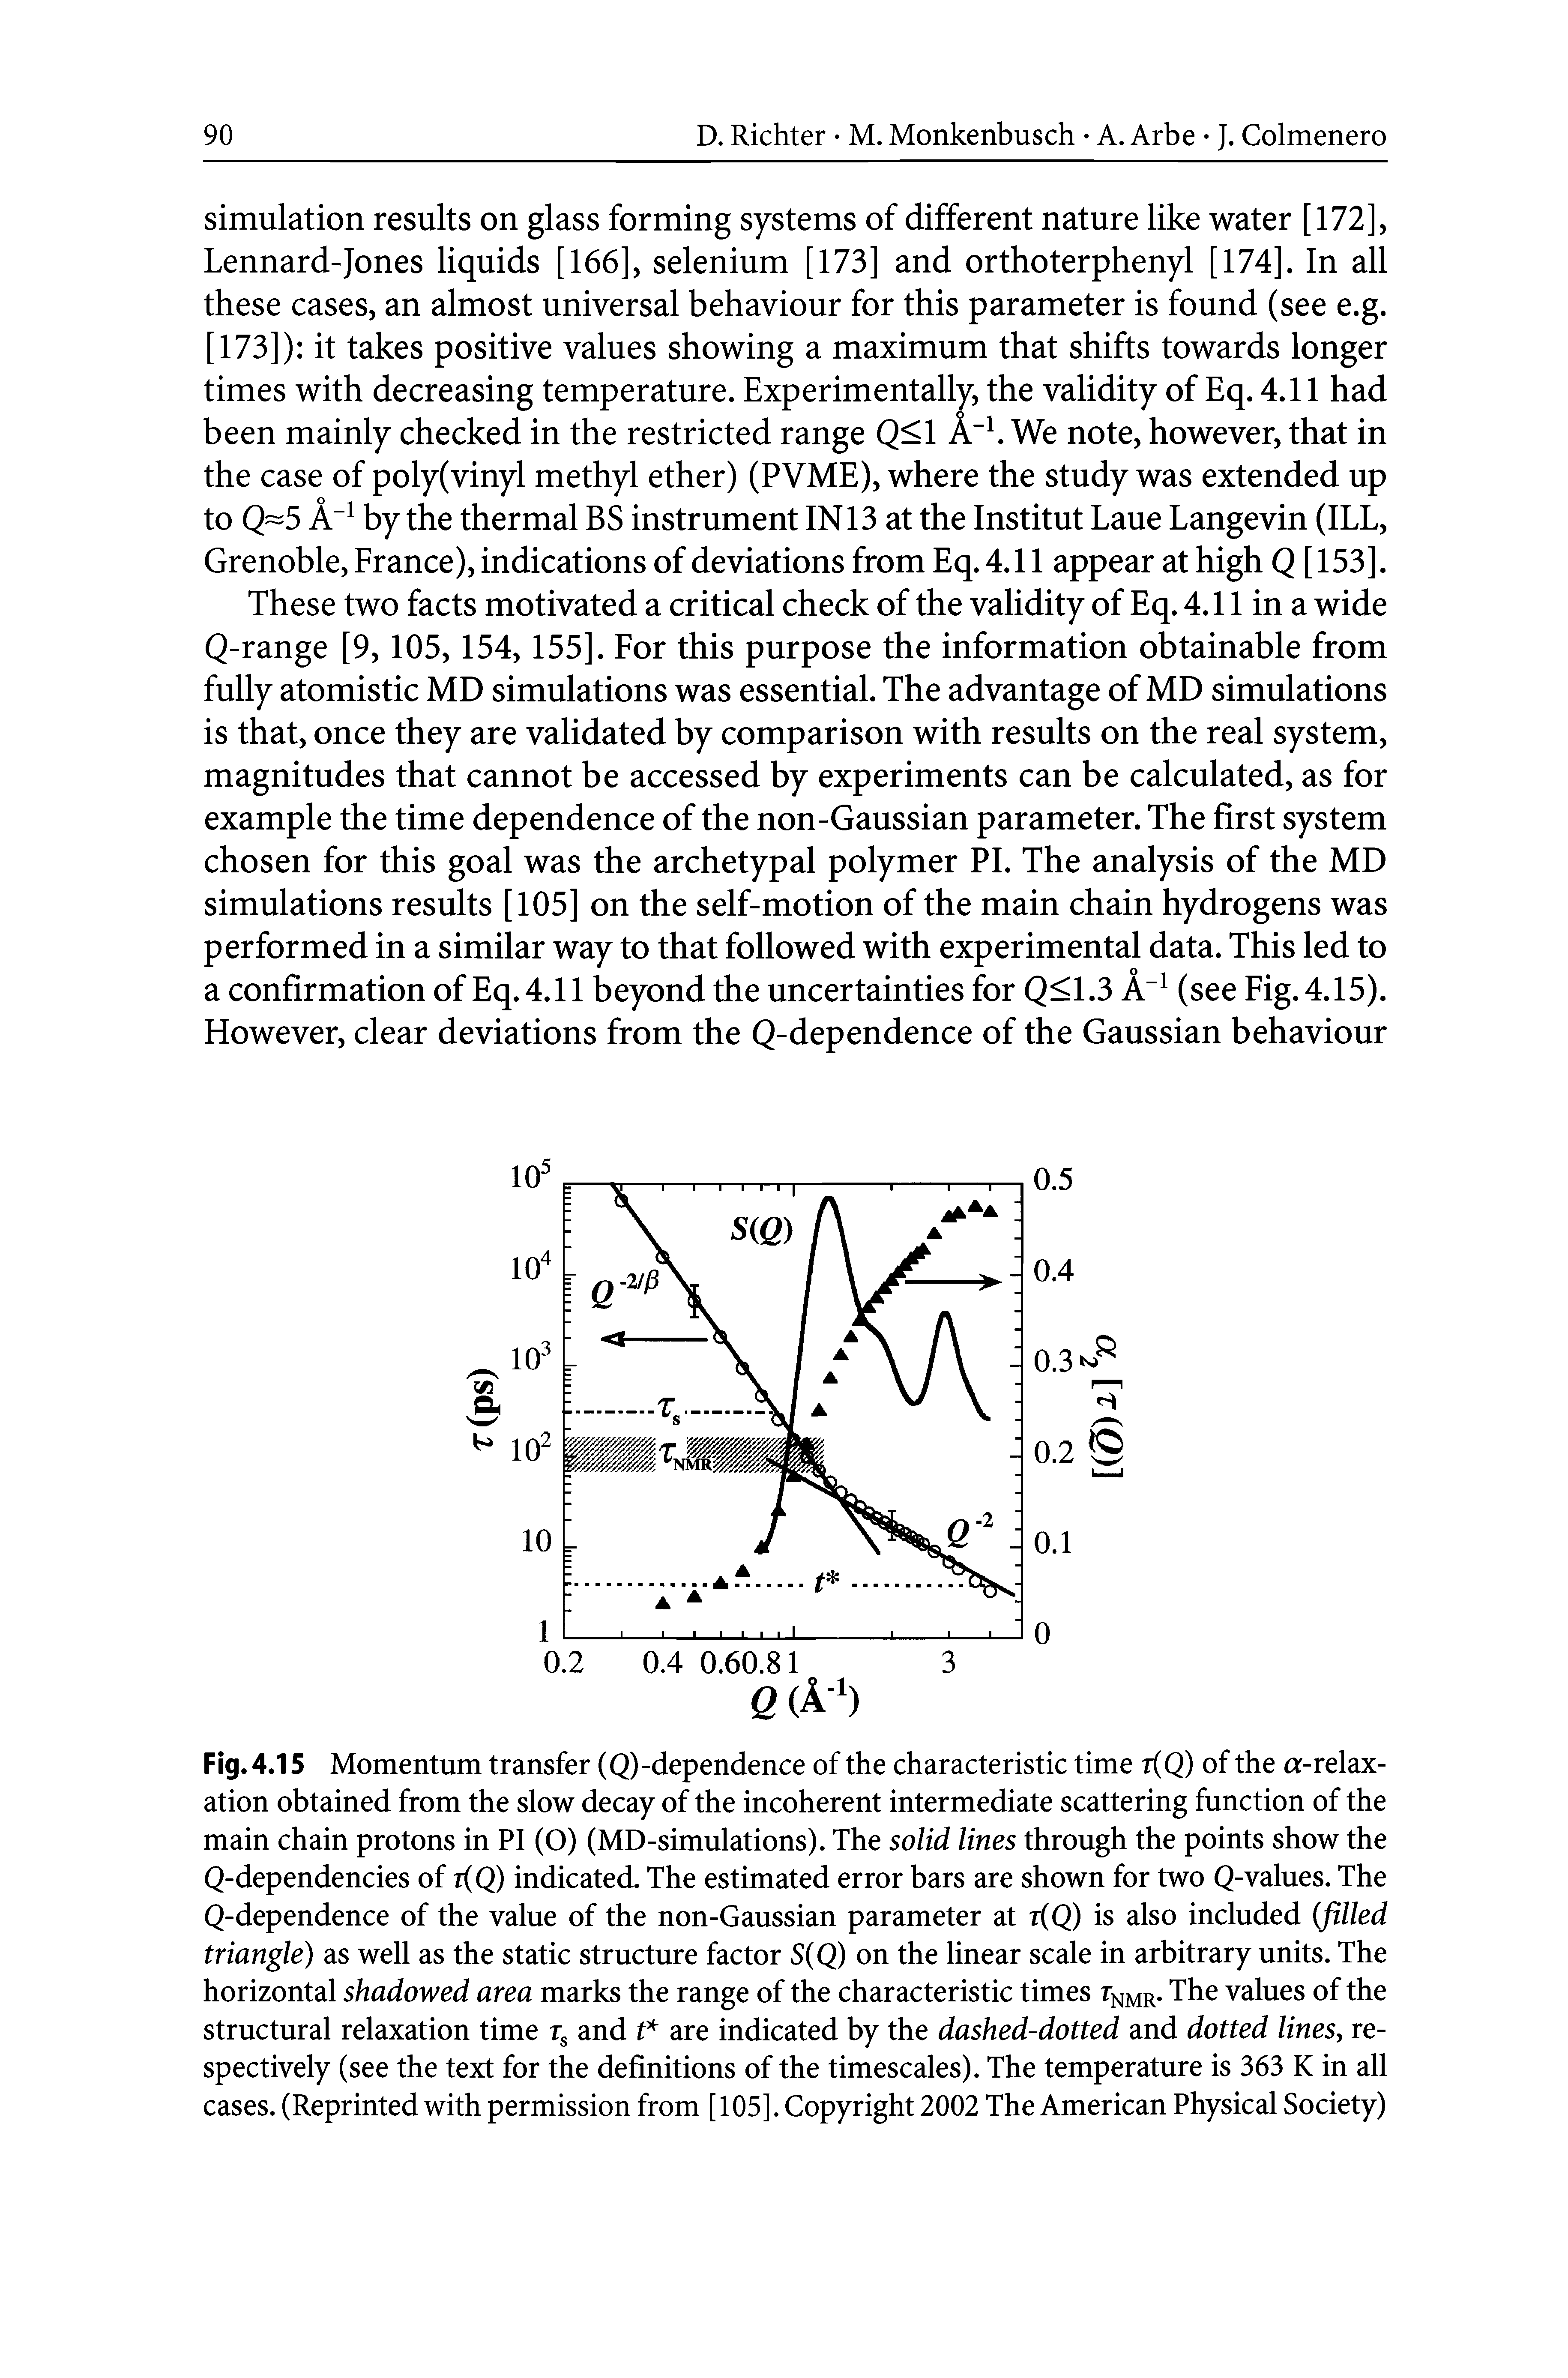 Fig. 4.15 Momentum transfer (Q)-dependence of the characteristic time r(Q) of the a-relaxation obtained from the slow decay of the incoherent intermediate scattering function of the main chain protons in PI (O) (MD-simulations). The solid lines through the points show the Q-dependencies of z(Q) indicated. The estimated error bars are shown for two Q-values. The Q-dependence of the value of the non-Gaussian parameter at r(Q) is also included (filled triangle) as well as the static structure factor S(Q) on the linear scale in arbitrary units. The horizontal shadowed area marks the range of the characteristic times t mr- The values of the structural relaxation time and are indicated by the dashed-dotted and dotted lines, respectively (see the text for the definitions of the timescales). The temperature is 363 K in all cases. (Reprinted with permission from [105]. Copyright 2002 The American Physical Society)...